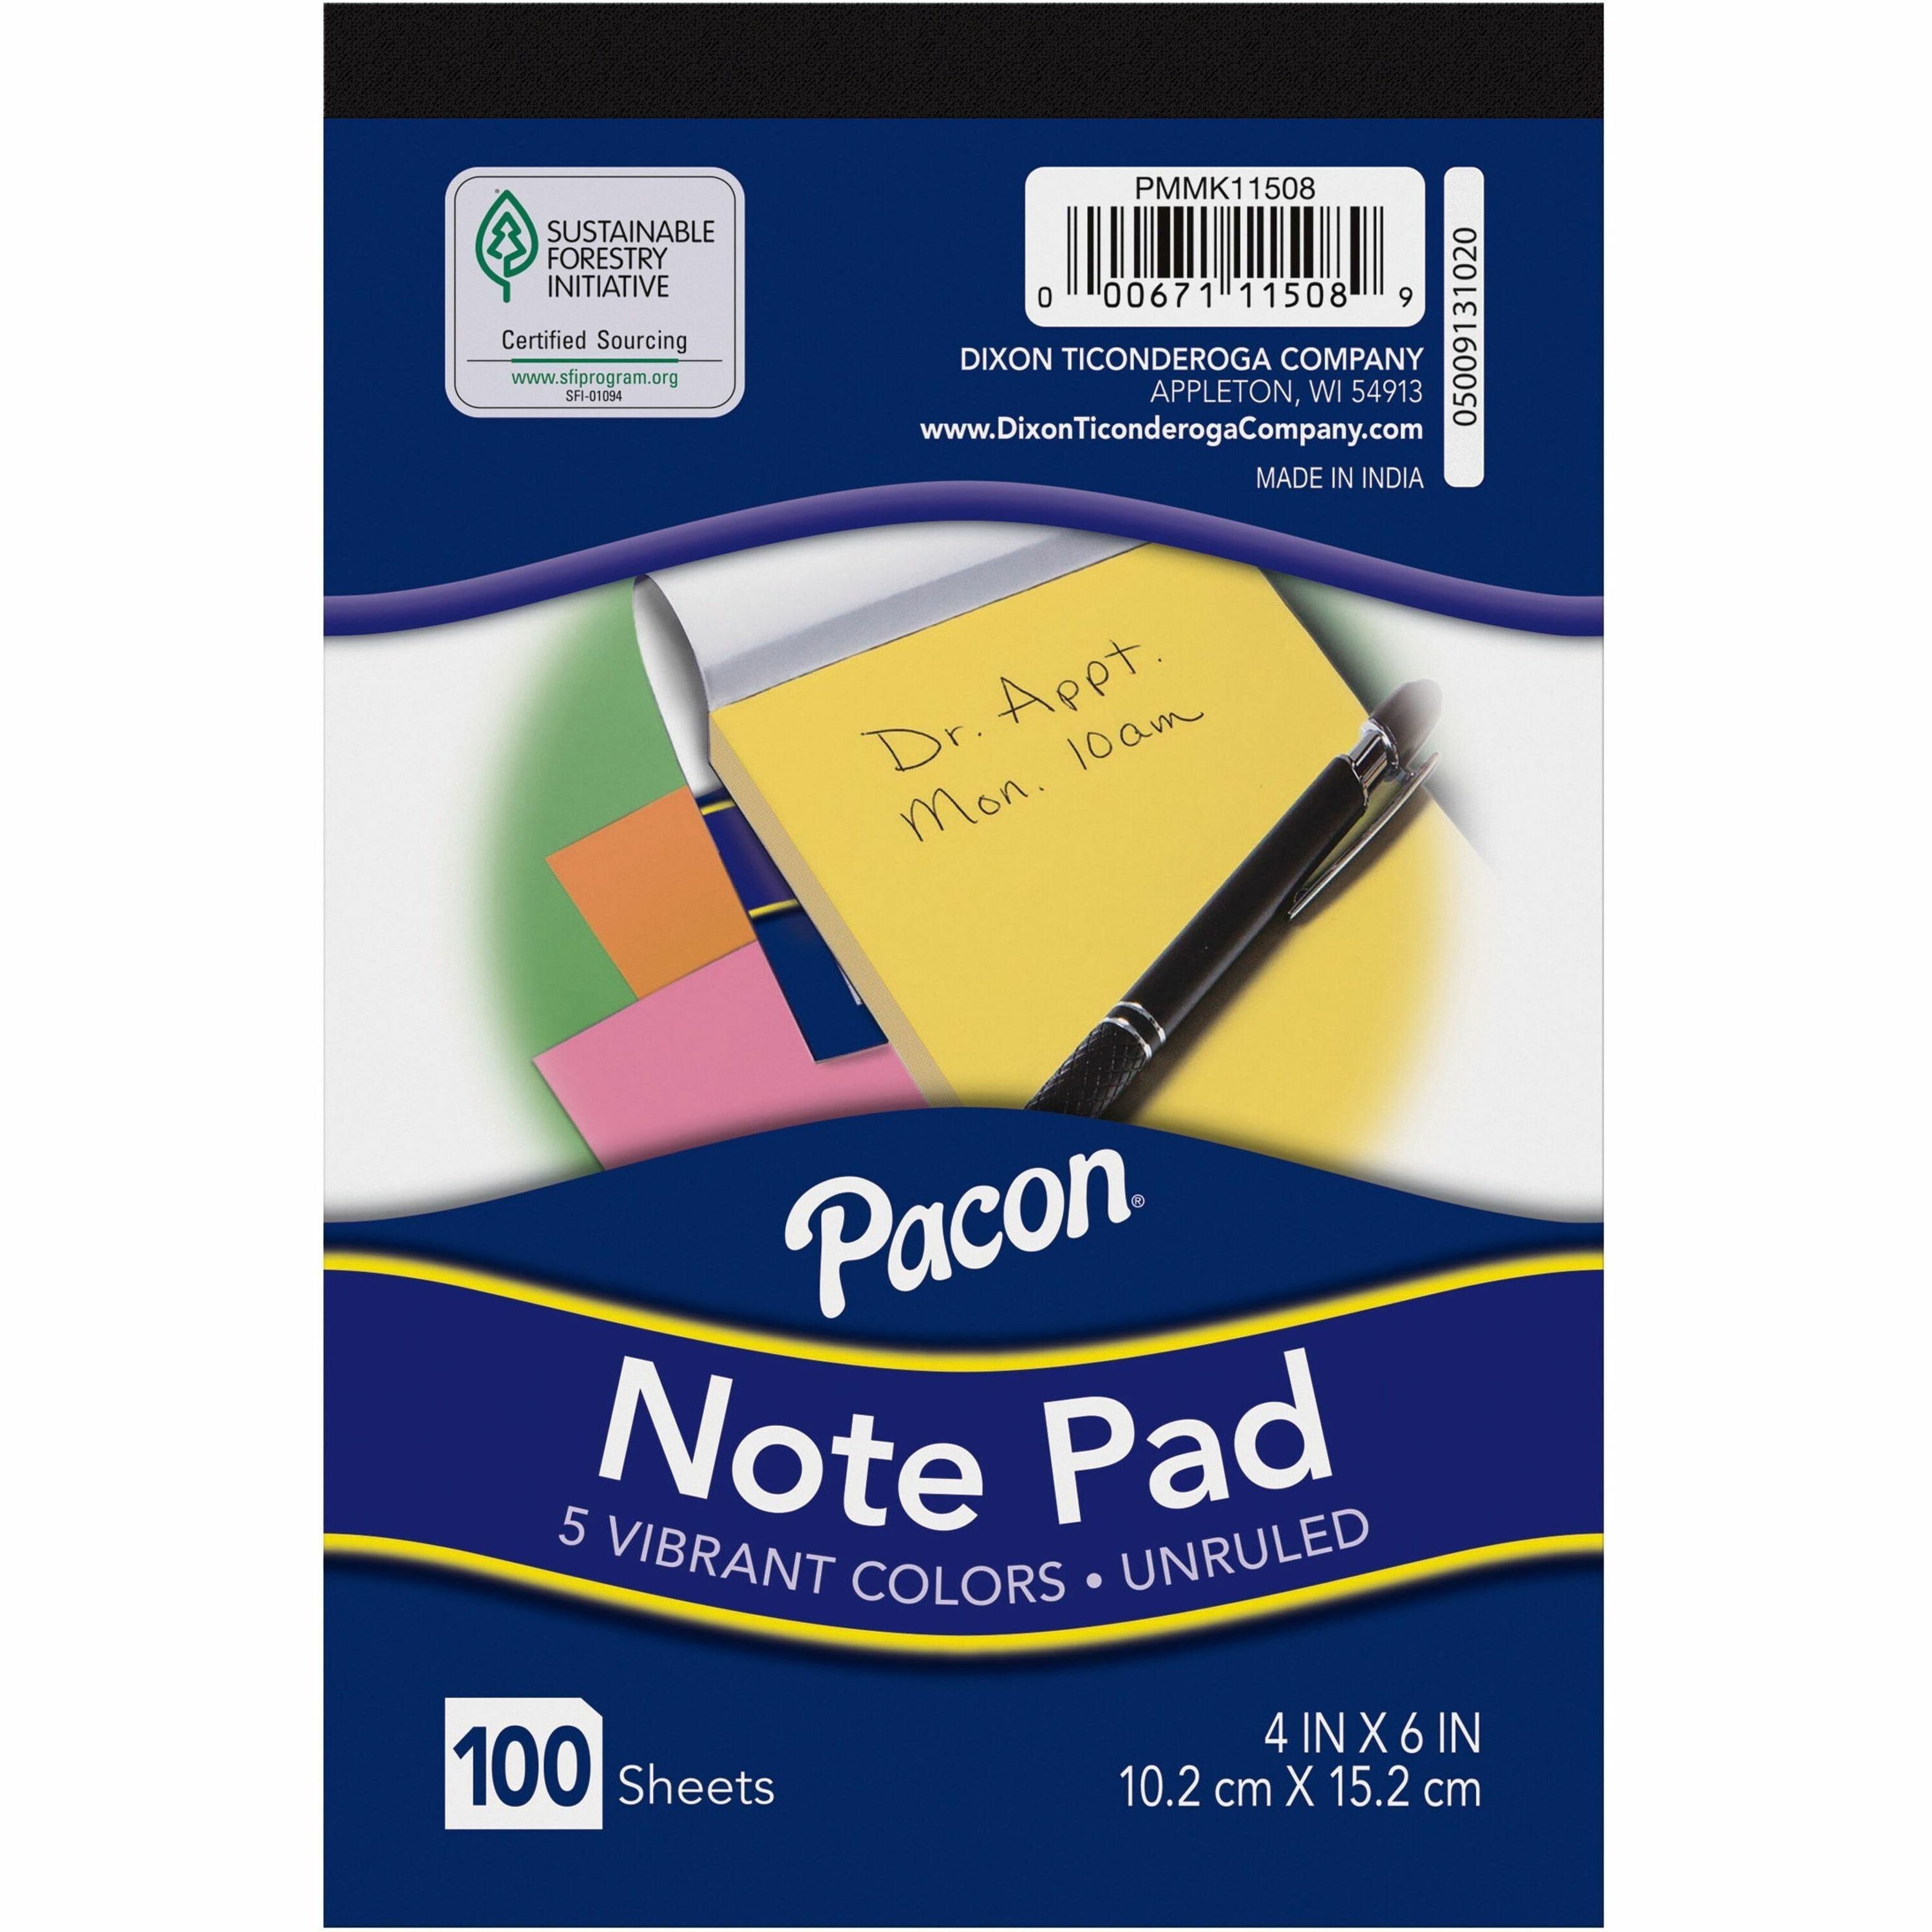 pacon-note-pad-4-x-6-rectangle-100-sheets-per-pad-unruled-assorted-recyclable-compact-1-each_pacpmmk11508 - 1